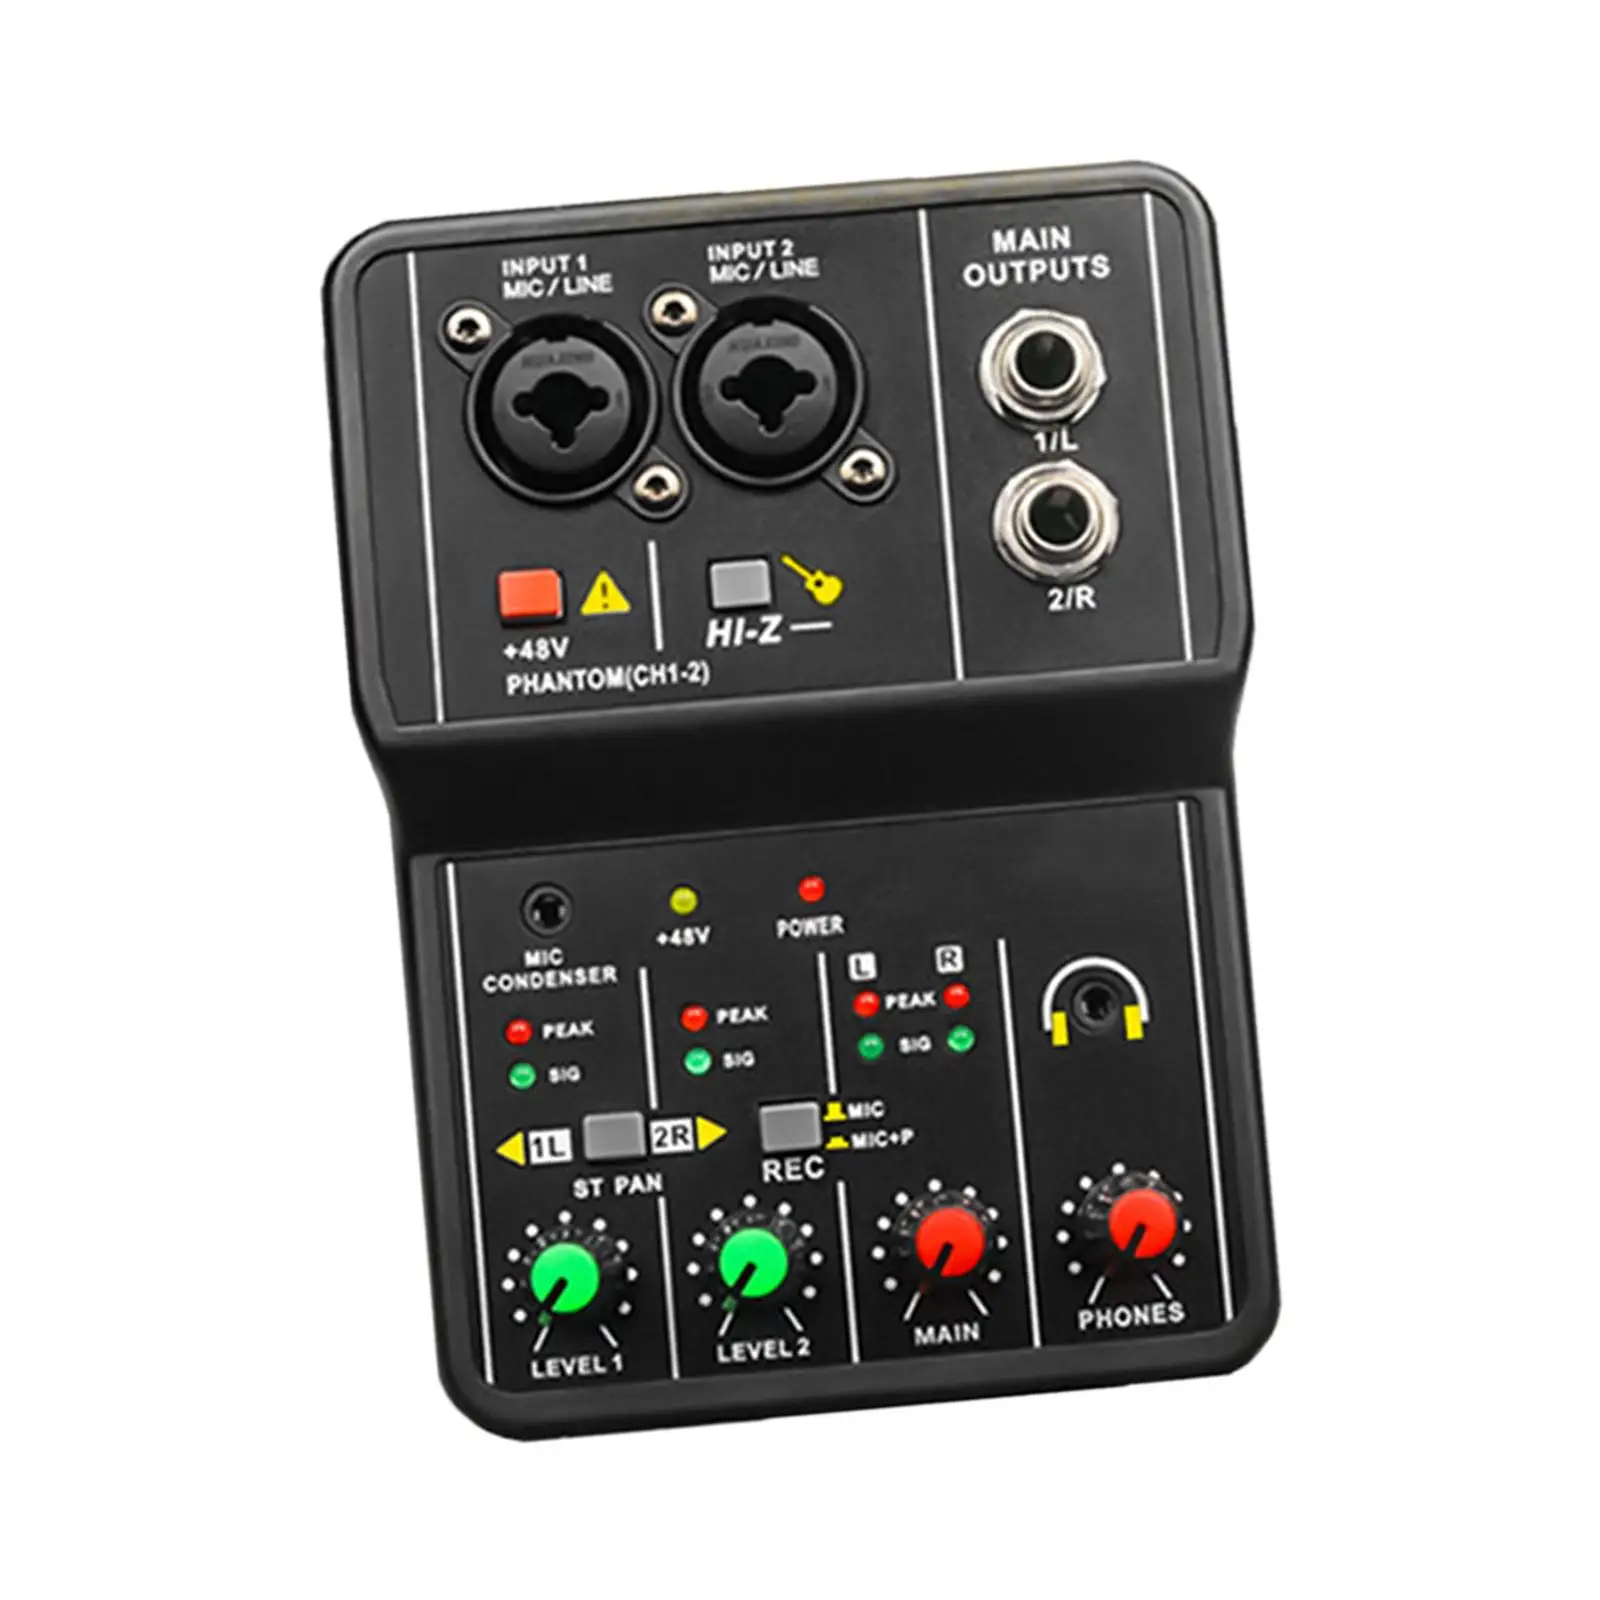 Portable USB Audio Interface Low Latency Plug and Play 3.5mm Stereo in Audio Mixer for Recording Podcasting Streaming Live Show